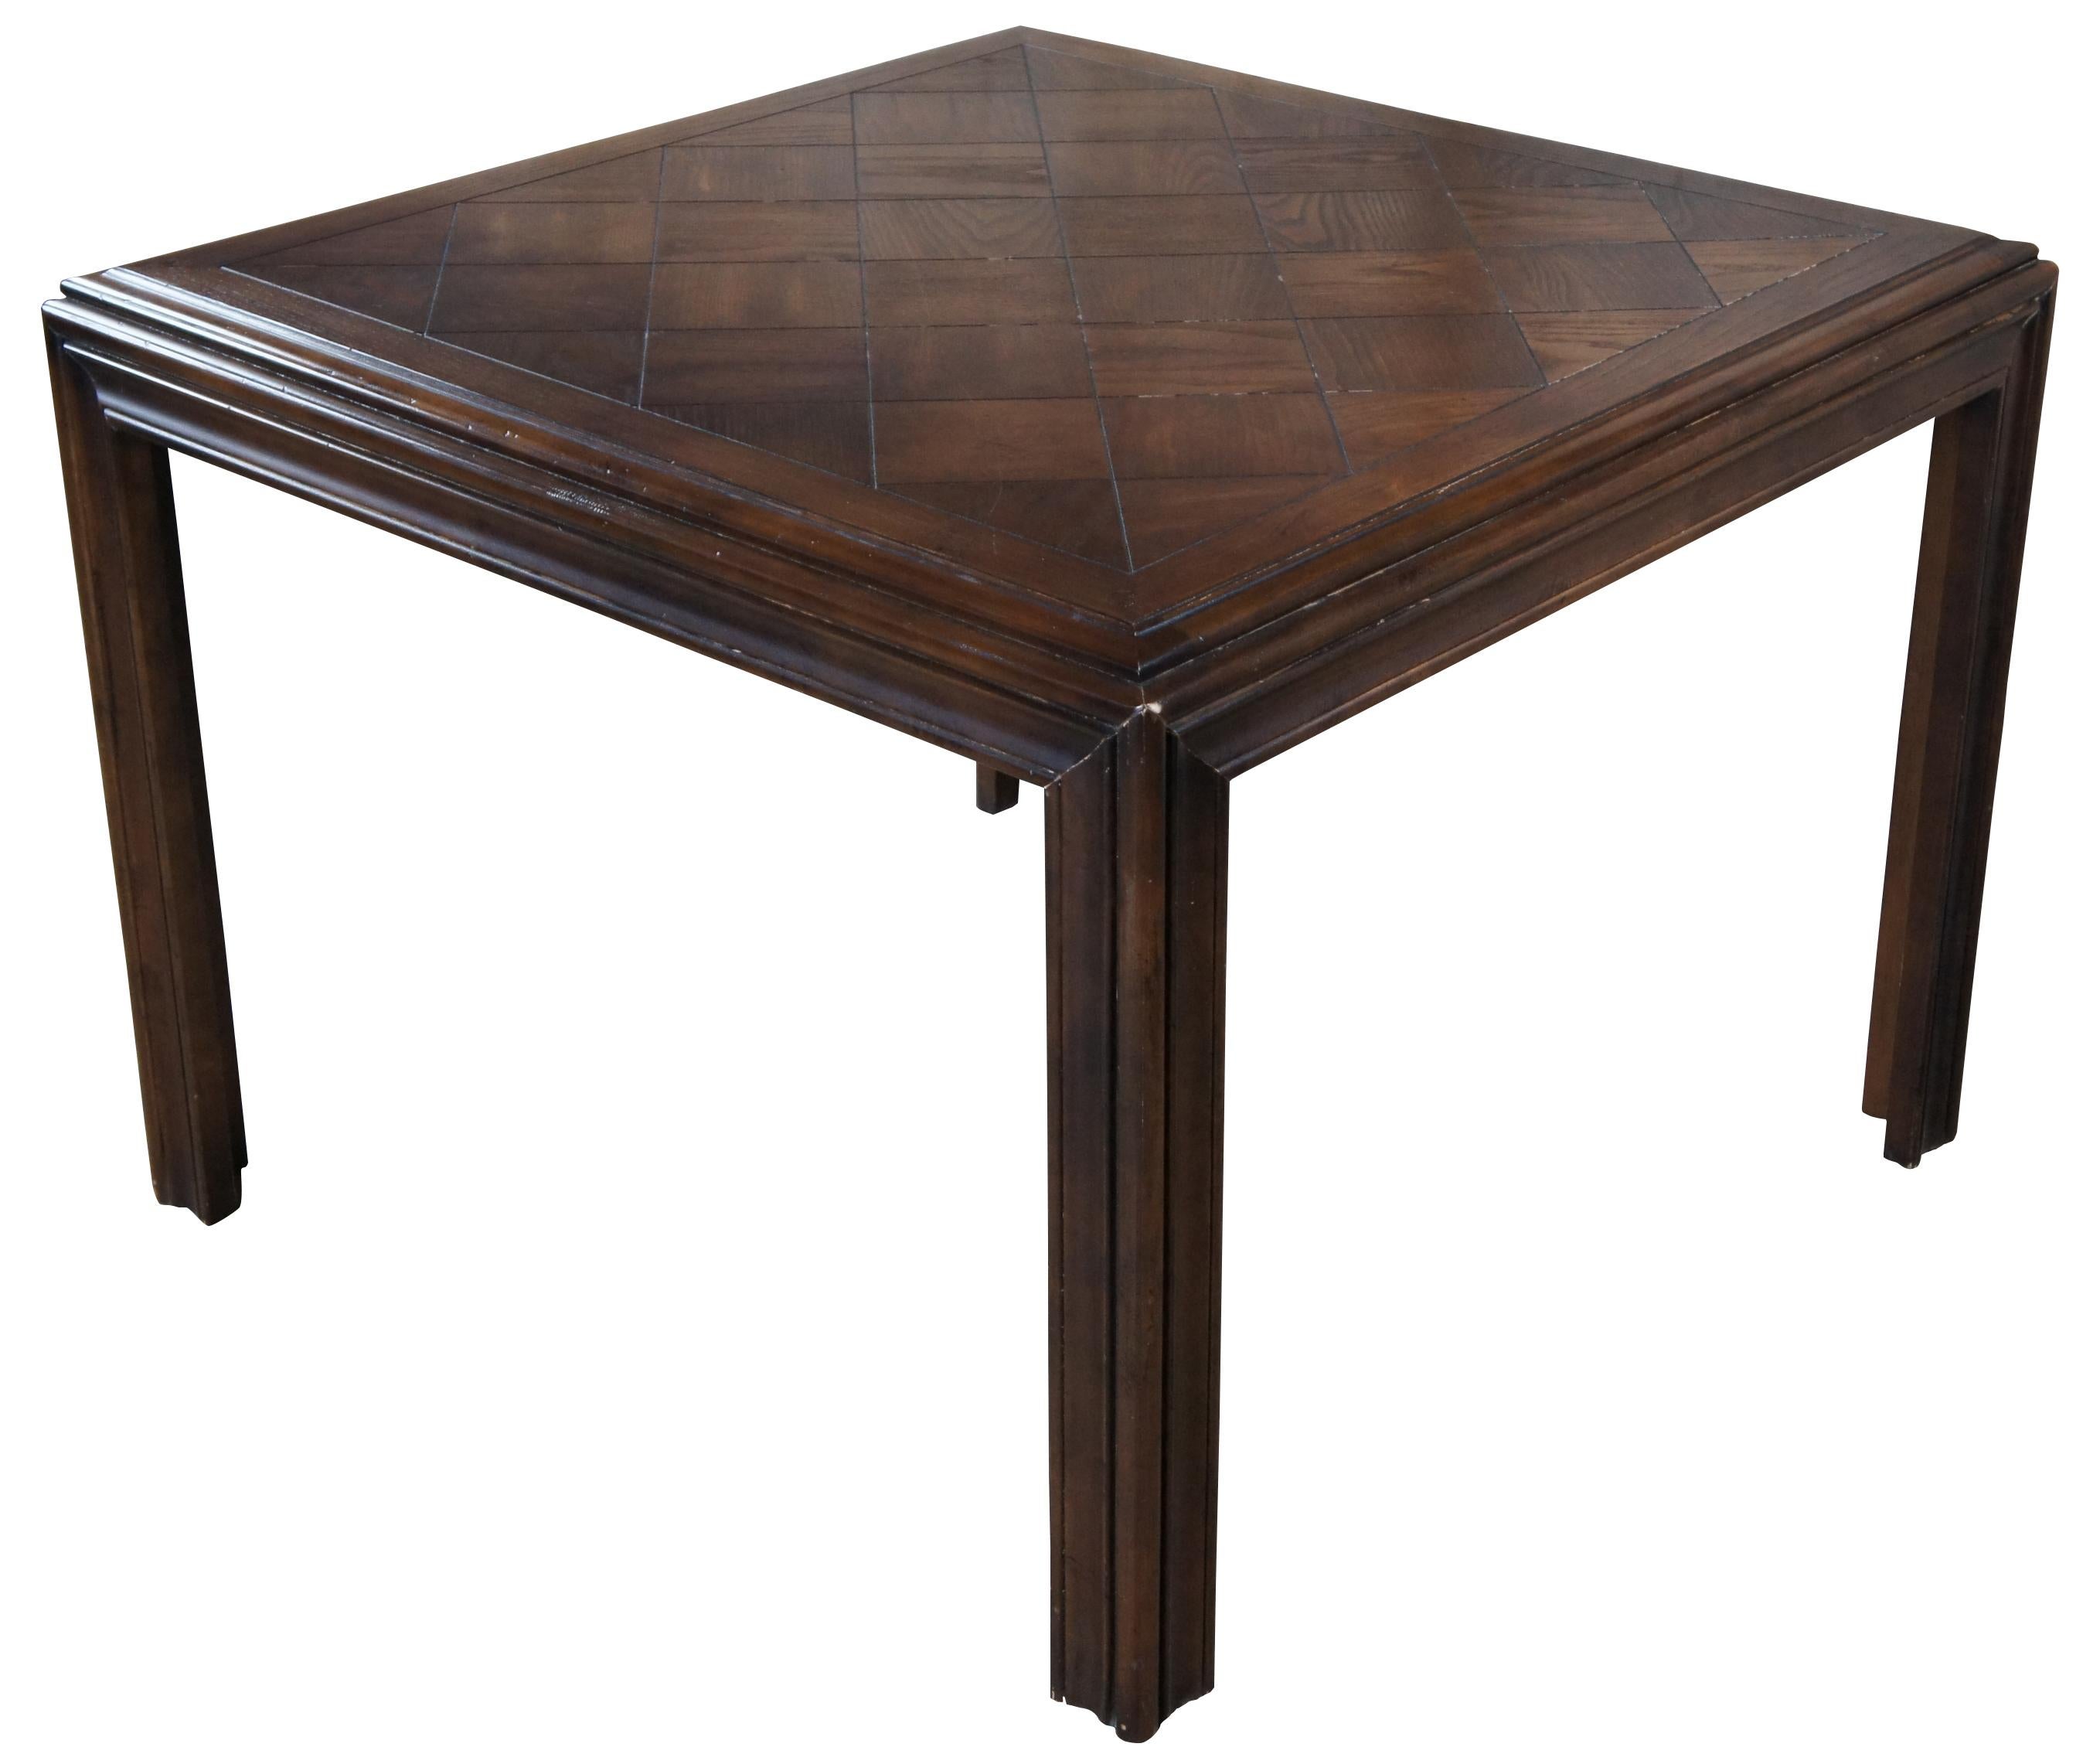 Vintage Lane Altavista Oak MCM dining table. Features a square parson styles form with parquetry top, natural distressing and glass top. Made on 01-27-78 in plant number 4.
 